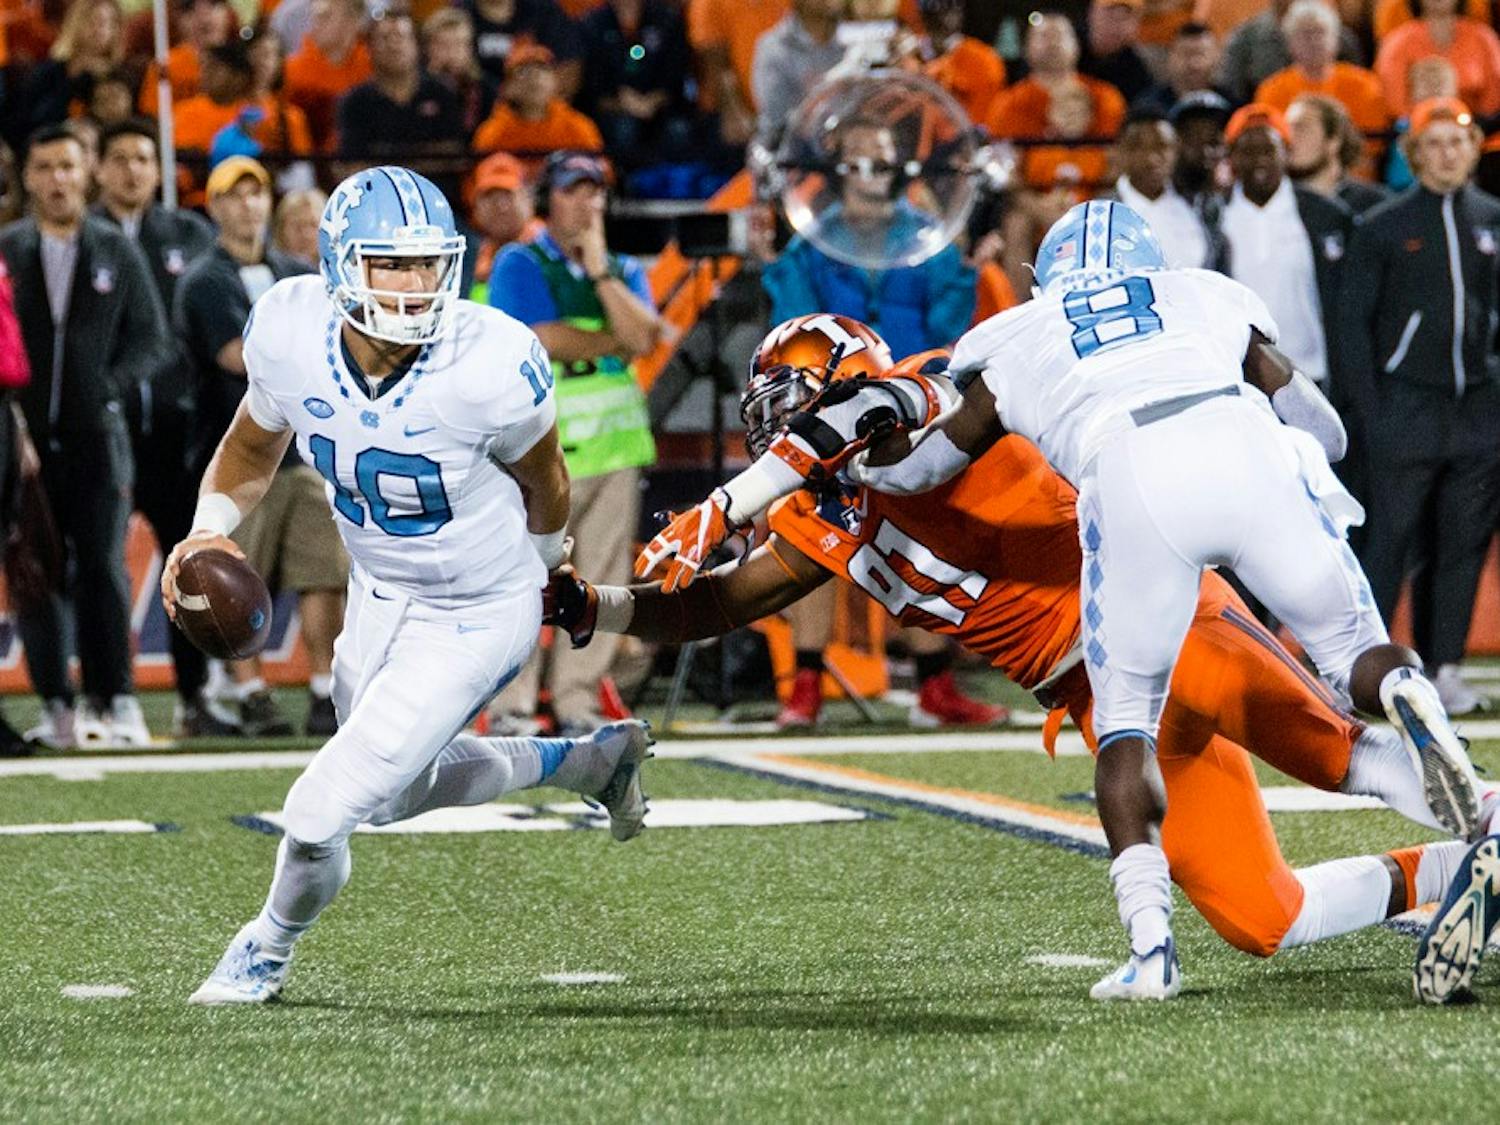 North Carolina quarterback Mitch Trubisky (10) dodges a tackle from Illinois defensive lineman Dawuane Smoot (91) during the game against Illinois at Memorial Stadium on Saturday, September 10. The Tar Heels won 48-23.